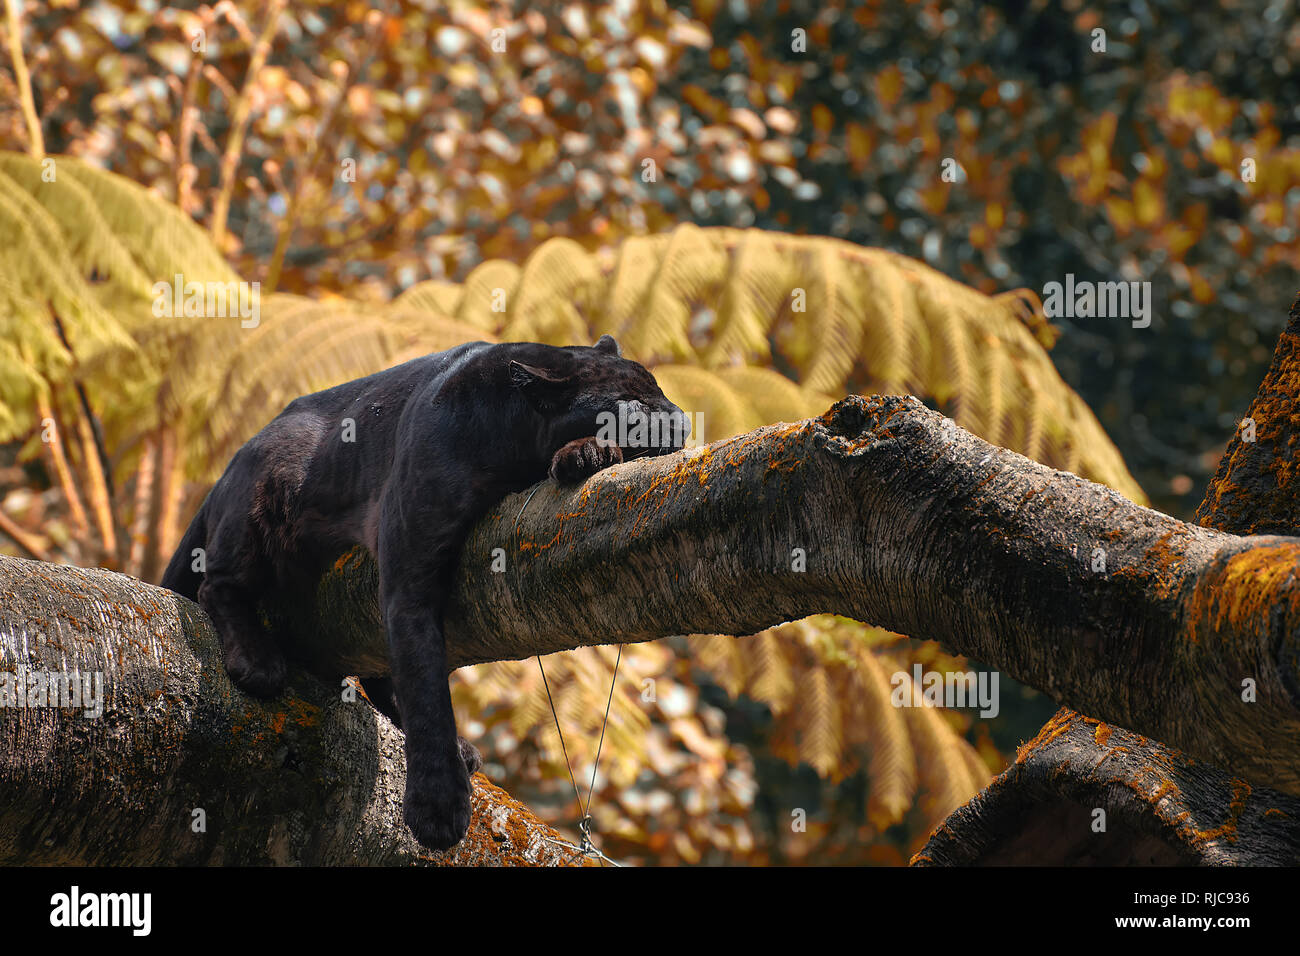 Black panther lying in a tree, Indonesia Stock Photo